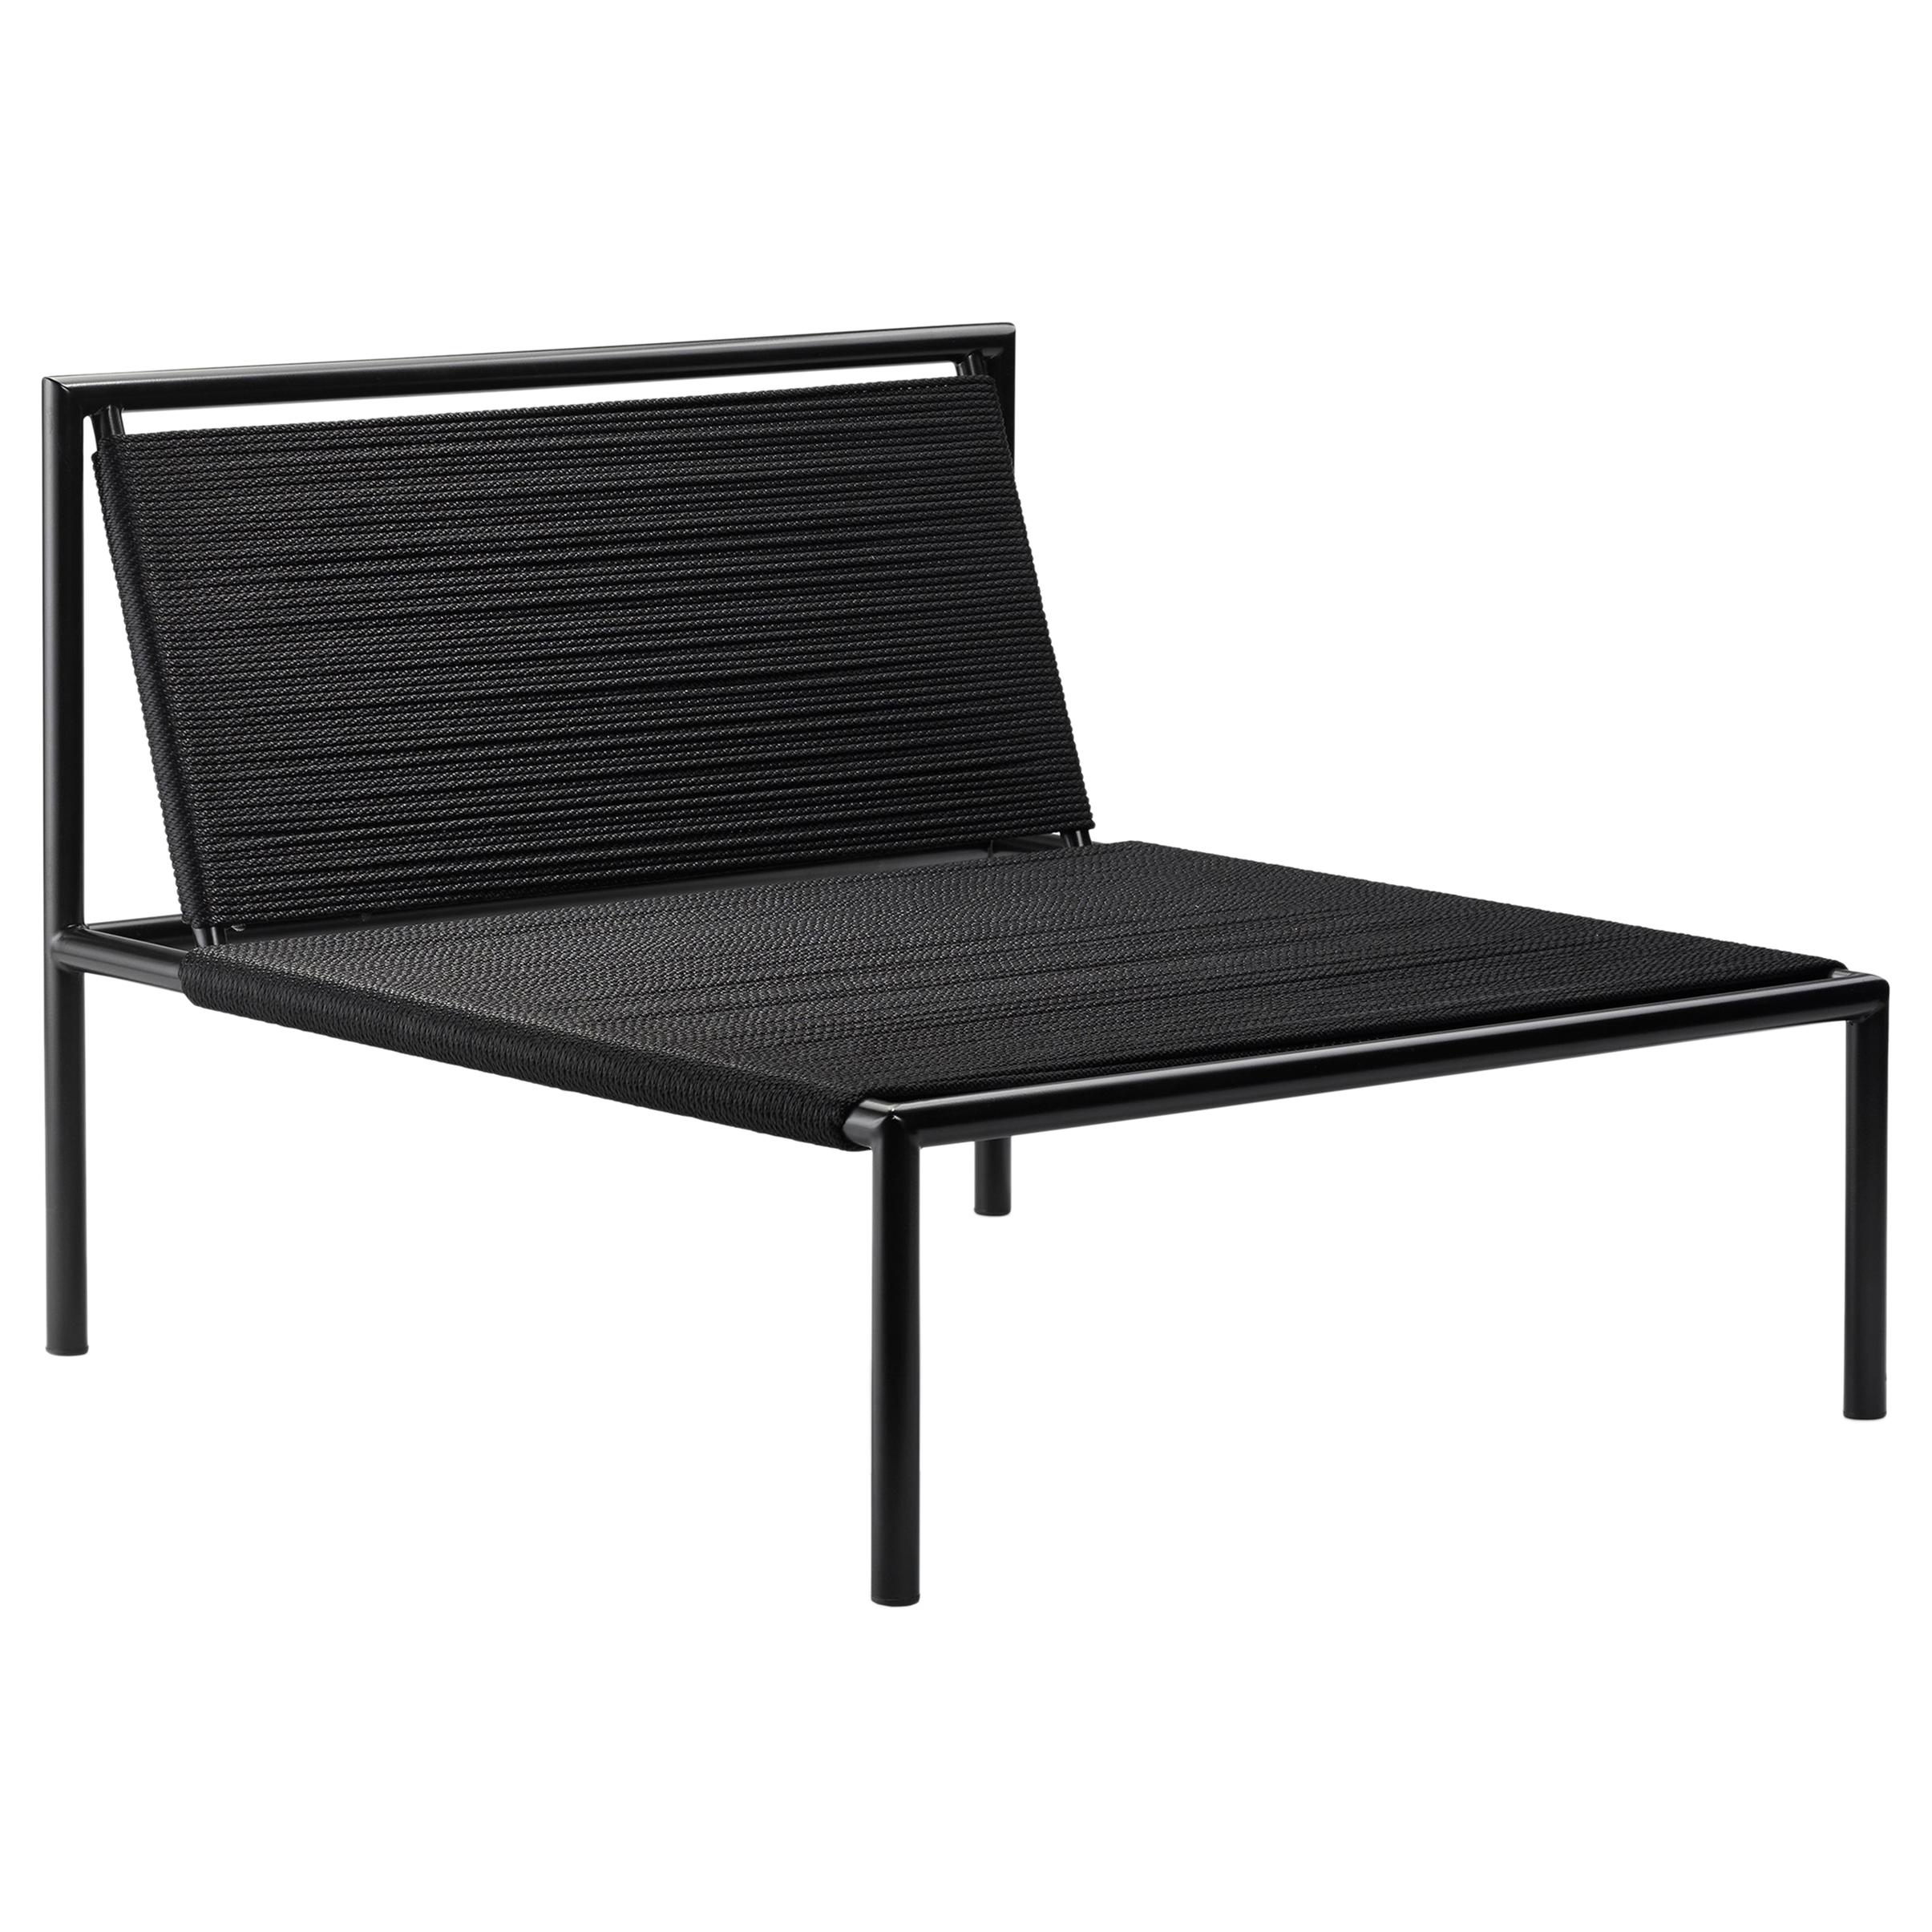 Outdoor Chair Armless Stainless Steel Powder Coated Black and Nylon Cord For Sale